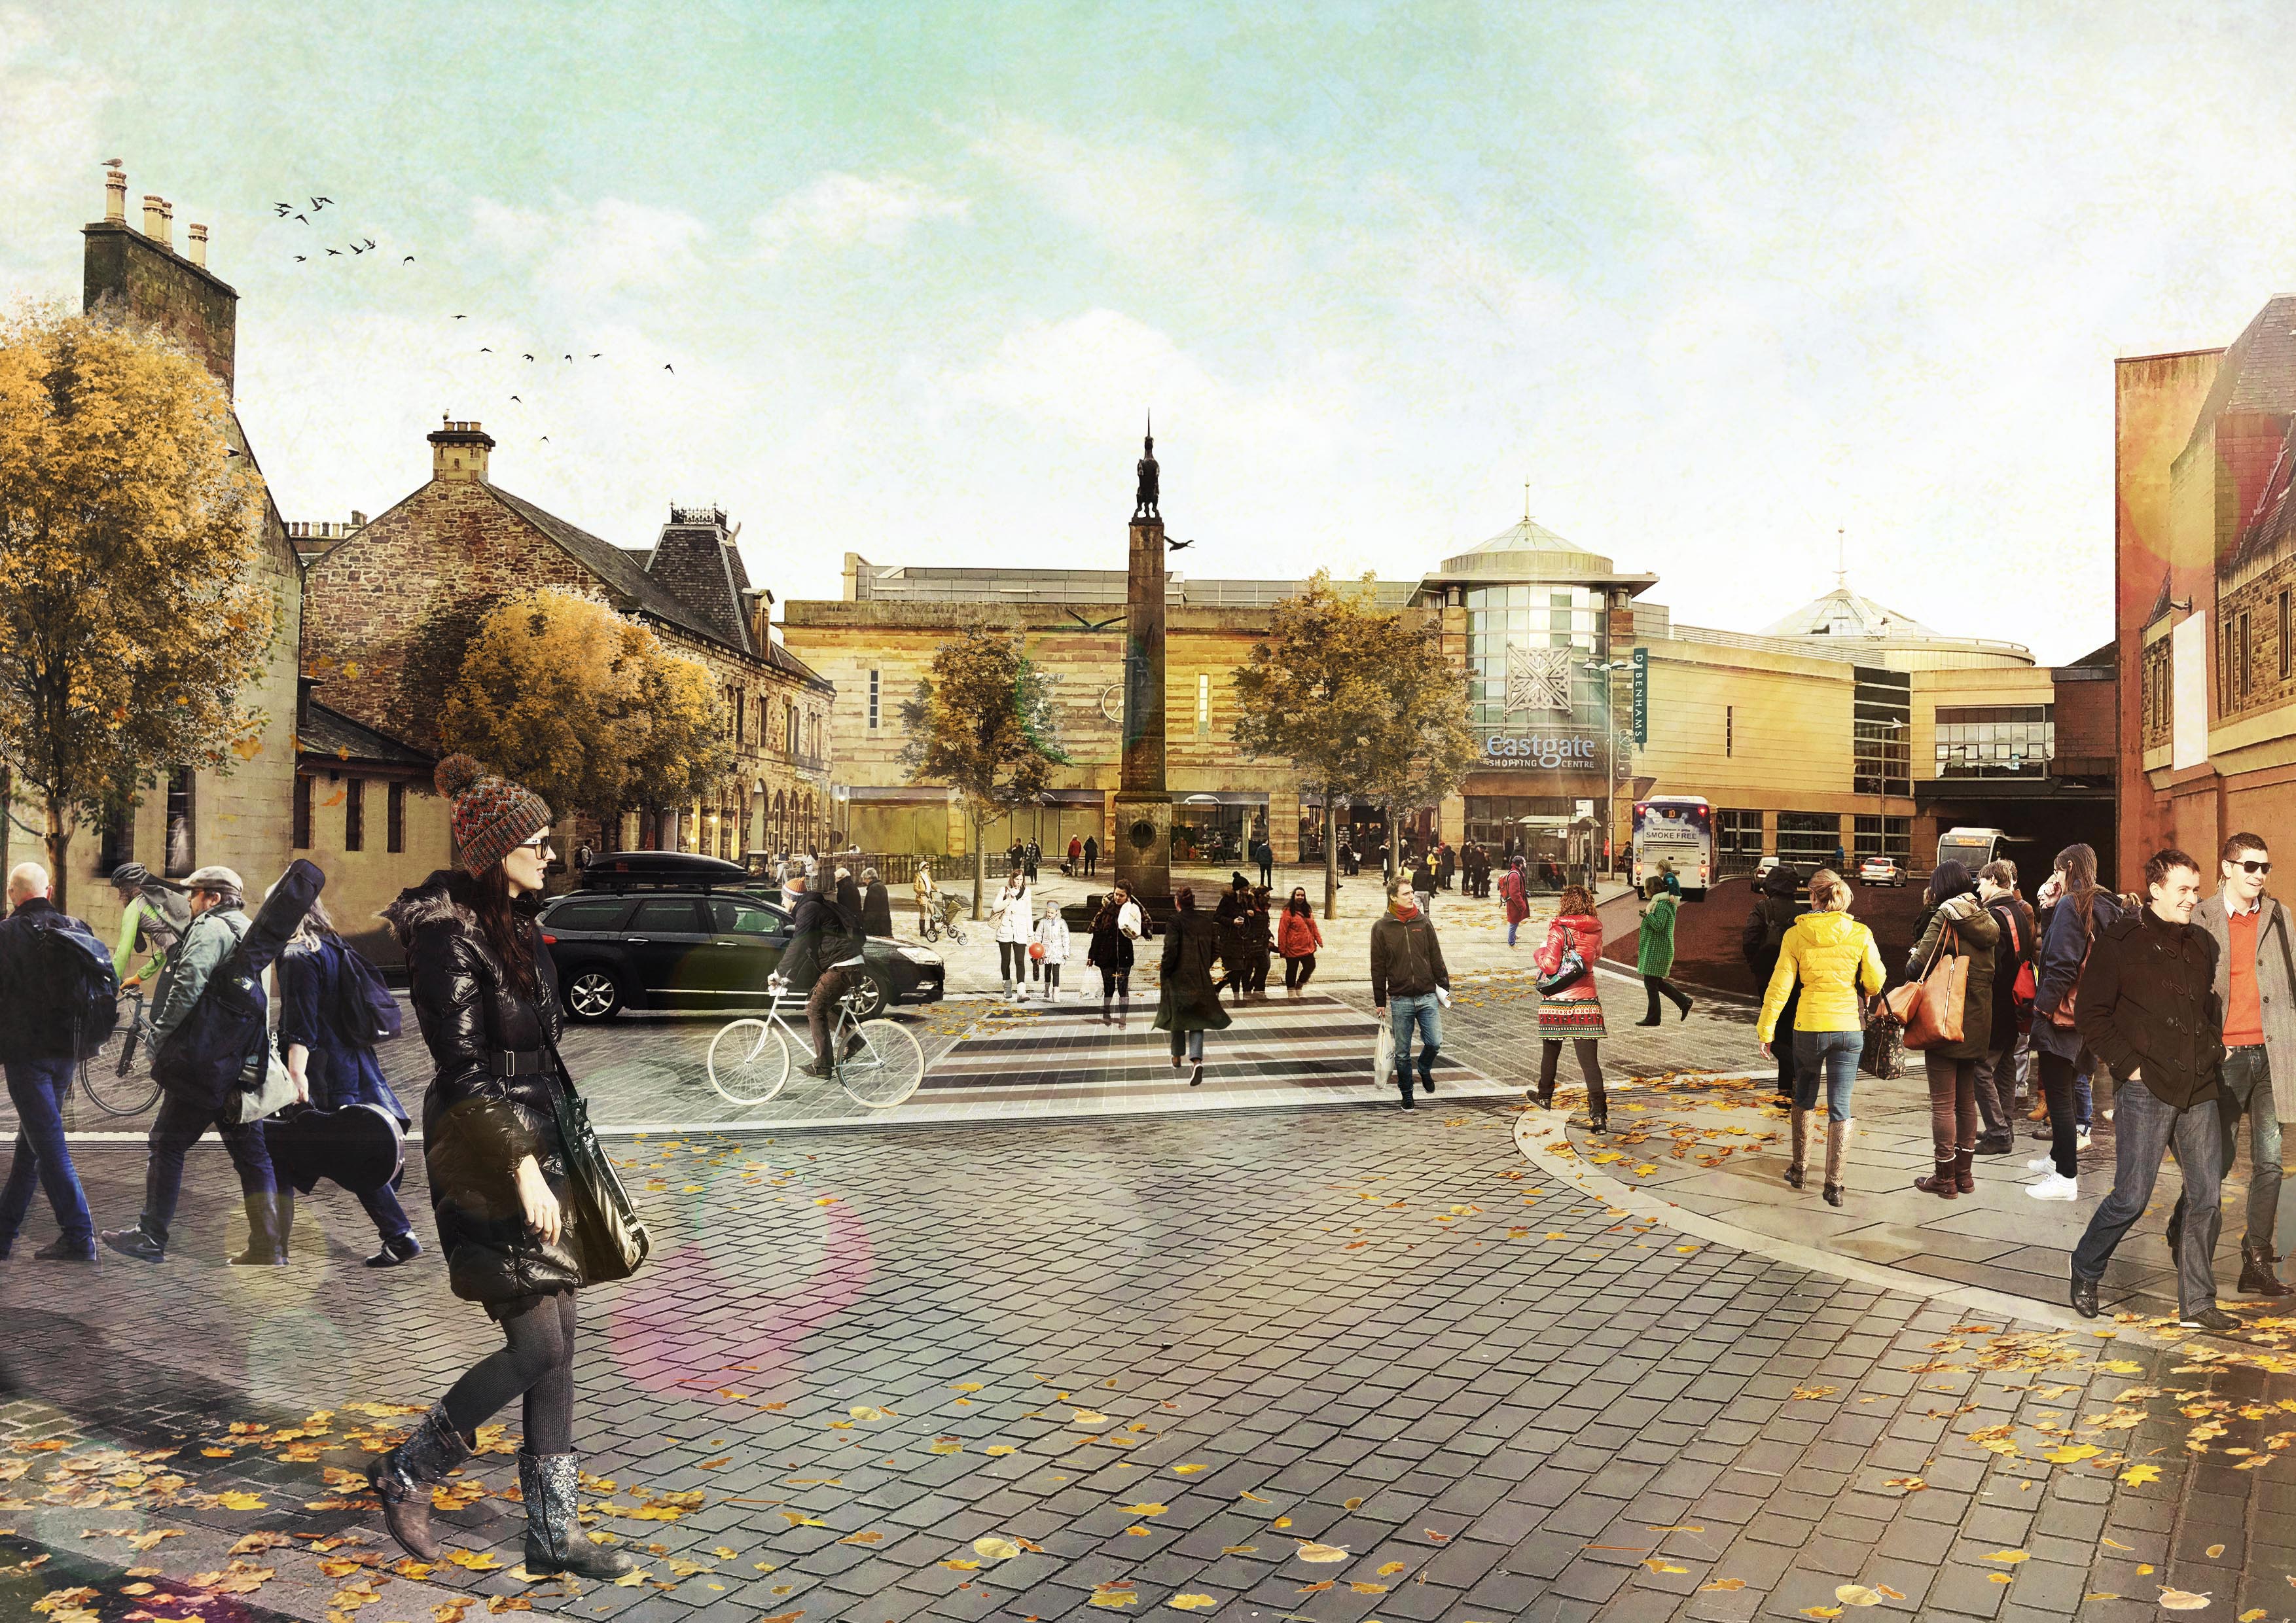 Artist impression showing what Accessing Inverness may look like after its £3-£6 million facelift.